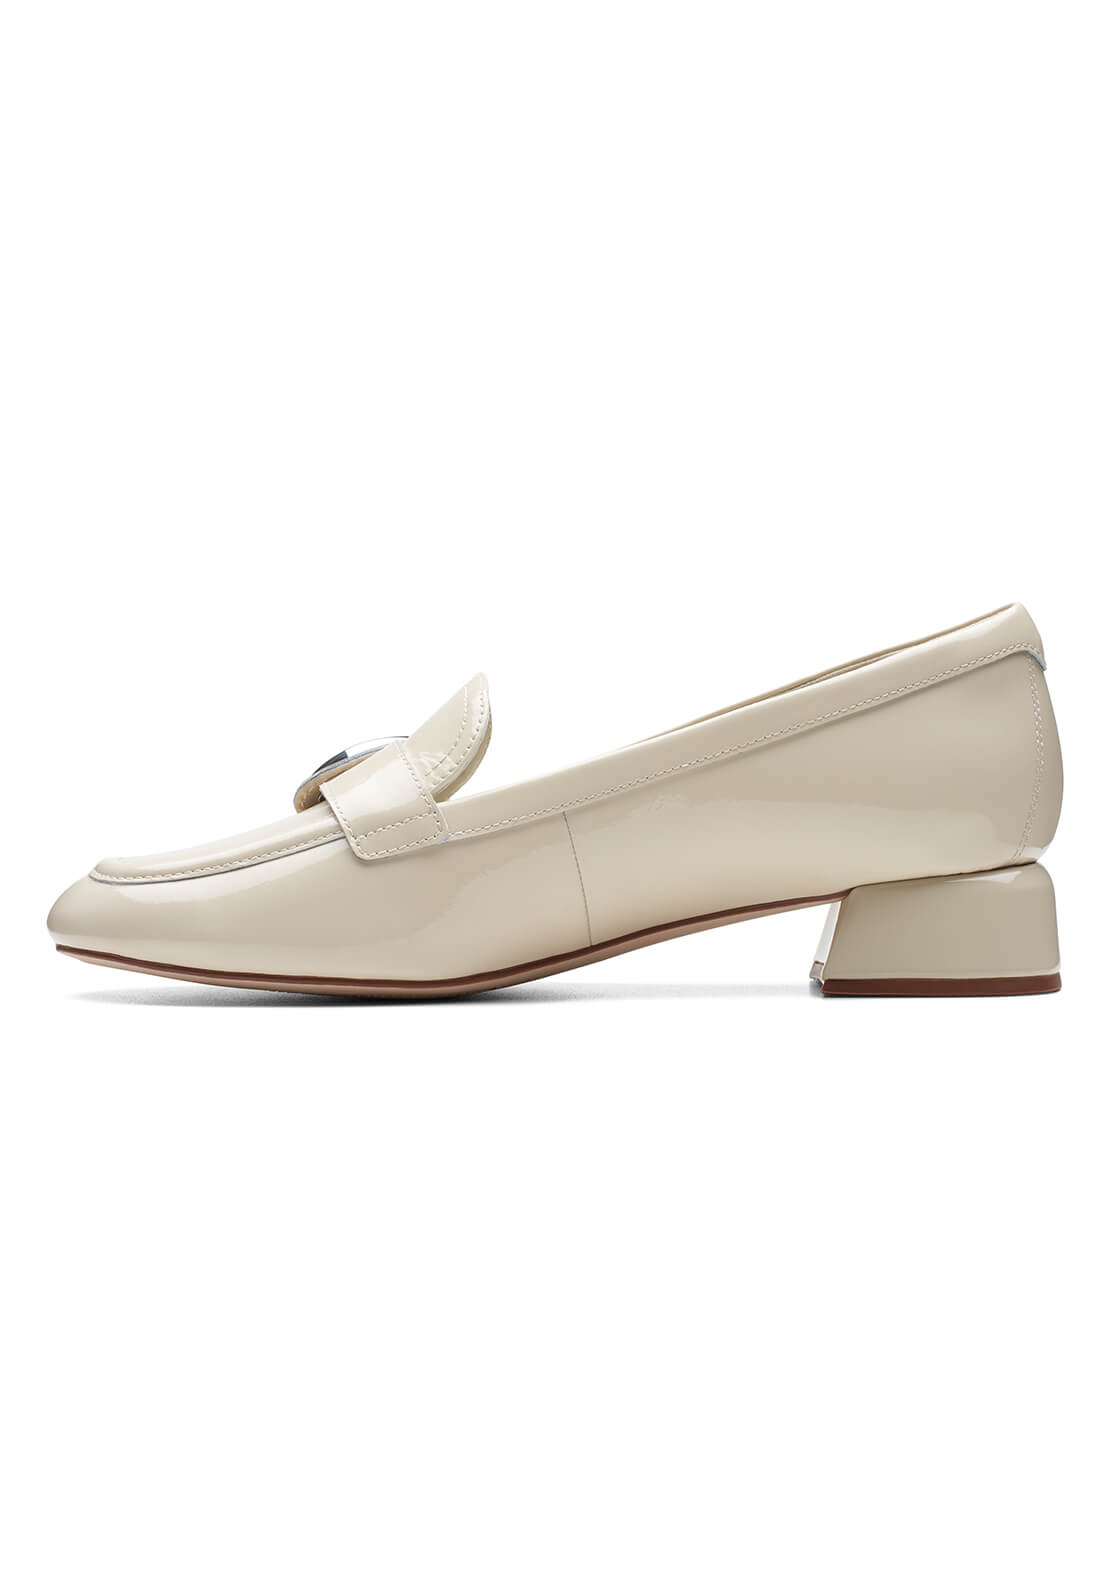 Clarks Daiss30 Trim Heeled Loafer - Ivory 2 Shaws Department Stores